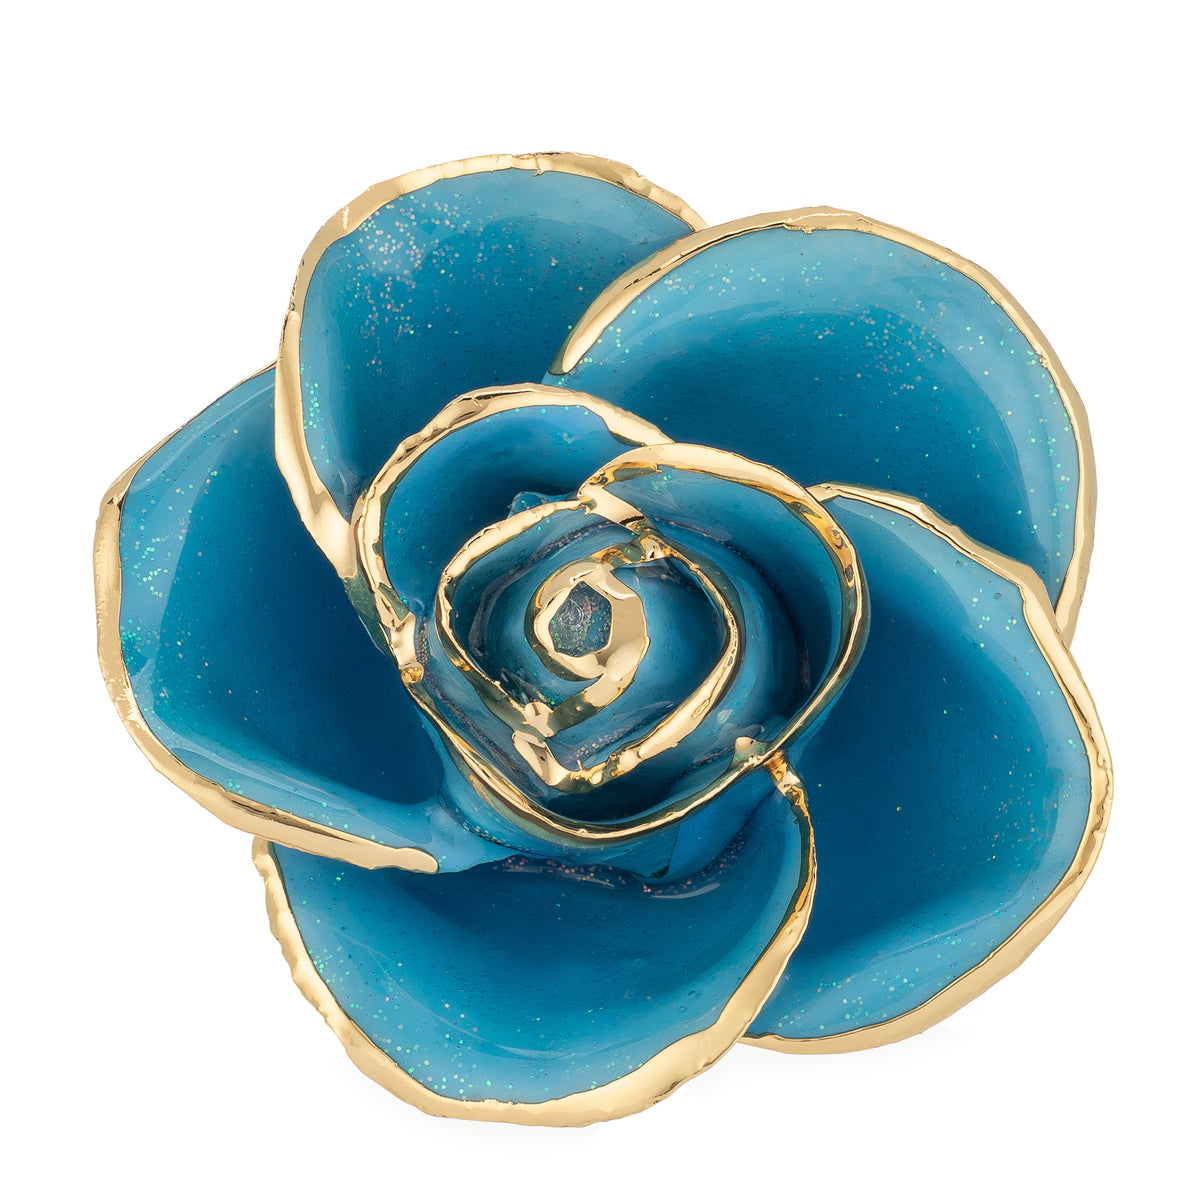 24K Gold Trimmed Forever Rose with Frozen Blue Petals with sparkles suspended in the finish. View of Stem, Leaves, and Rose Petals and Showing Detail of Gold Trim